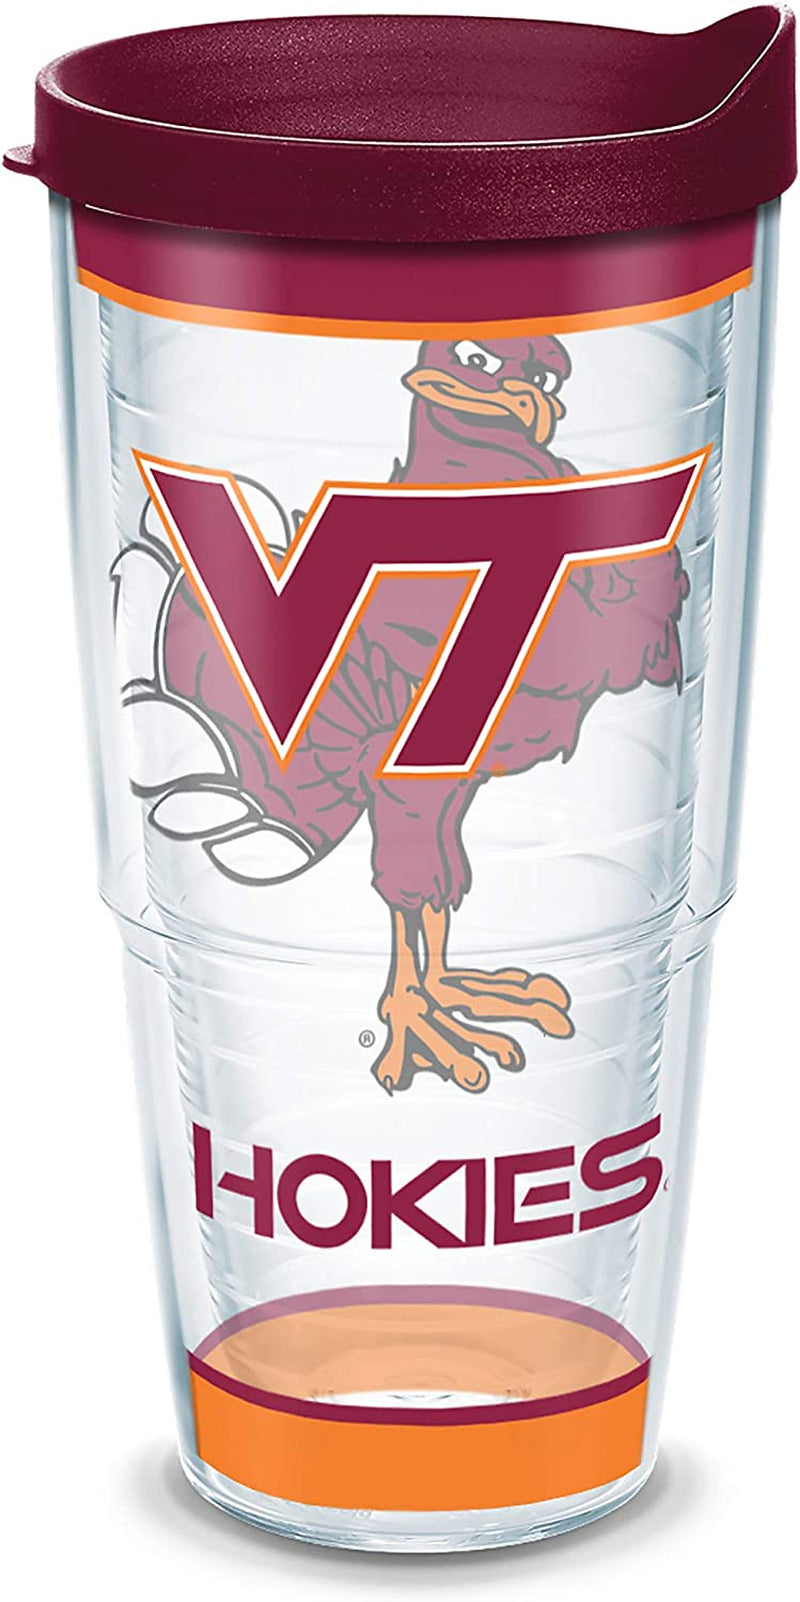 Tervis Virginia Tech University Hokies Made in USA Double Walled Insulated Tumbler, 1 Count (Pack of 1), Maroon Home & Garden > Kitchen & Dining > Tableware > Drinkware Tervis Tradition 24 oz 